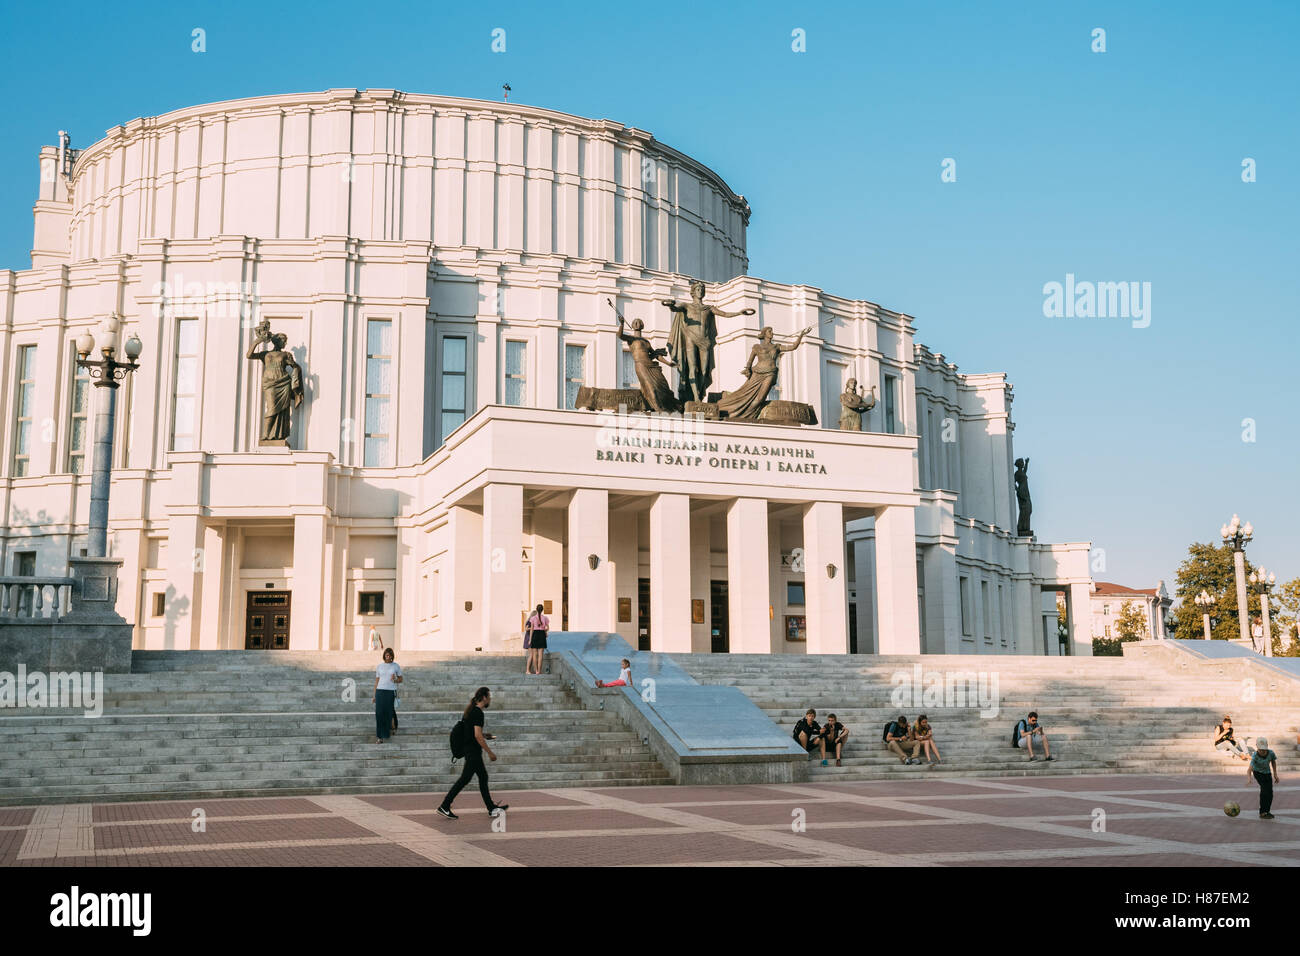 Minsk Belarus. Main Facade Of National Academic Grand Opera Ballet Theatre, White Building Of Constructivist Style Decorated By Stock Photo